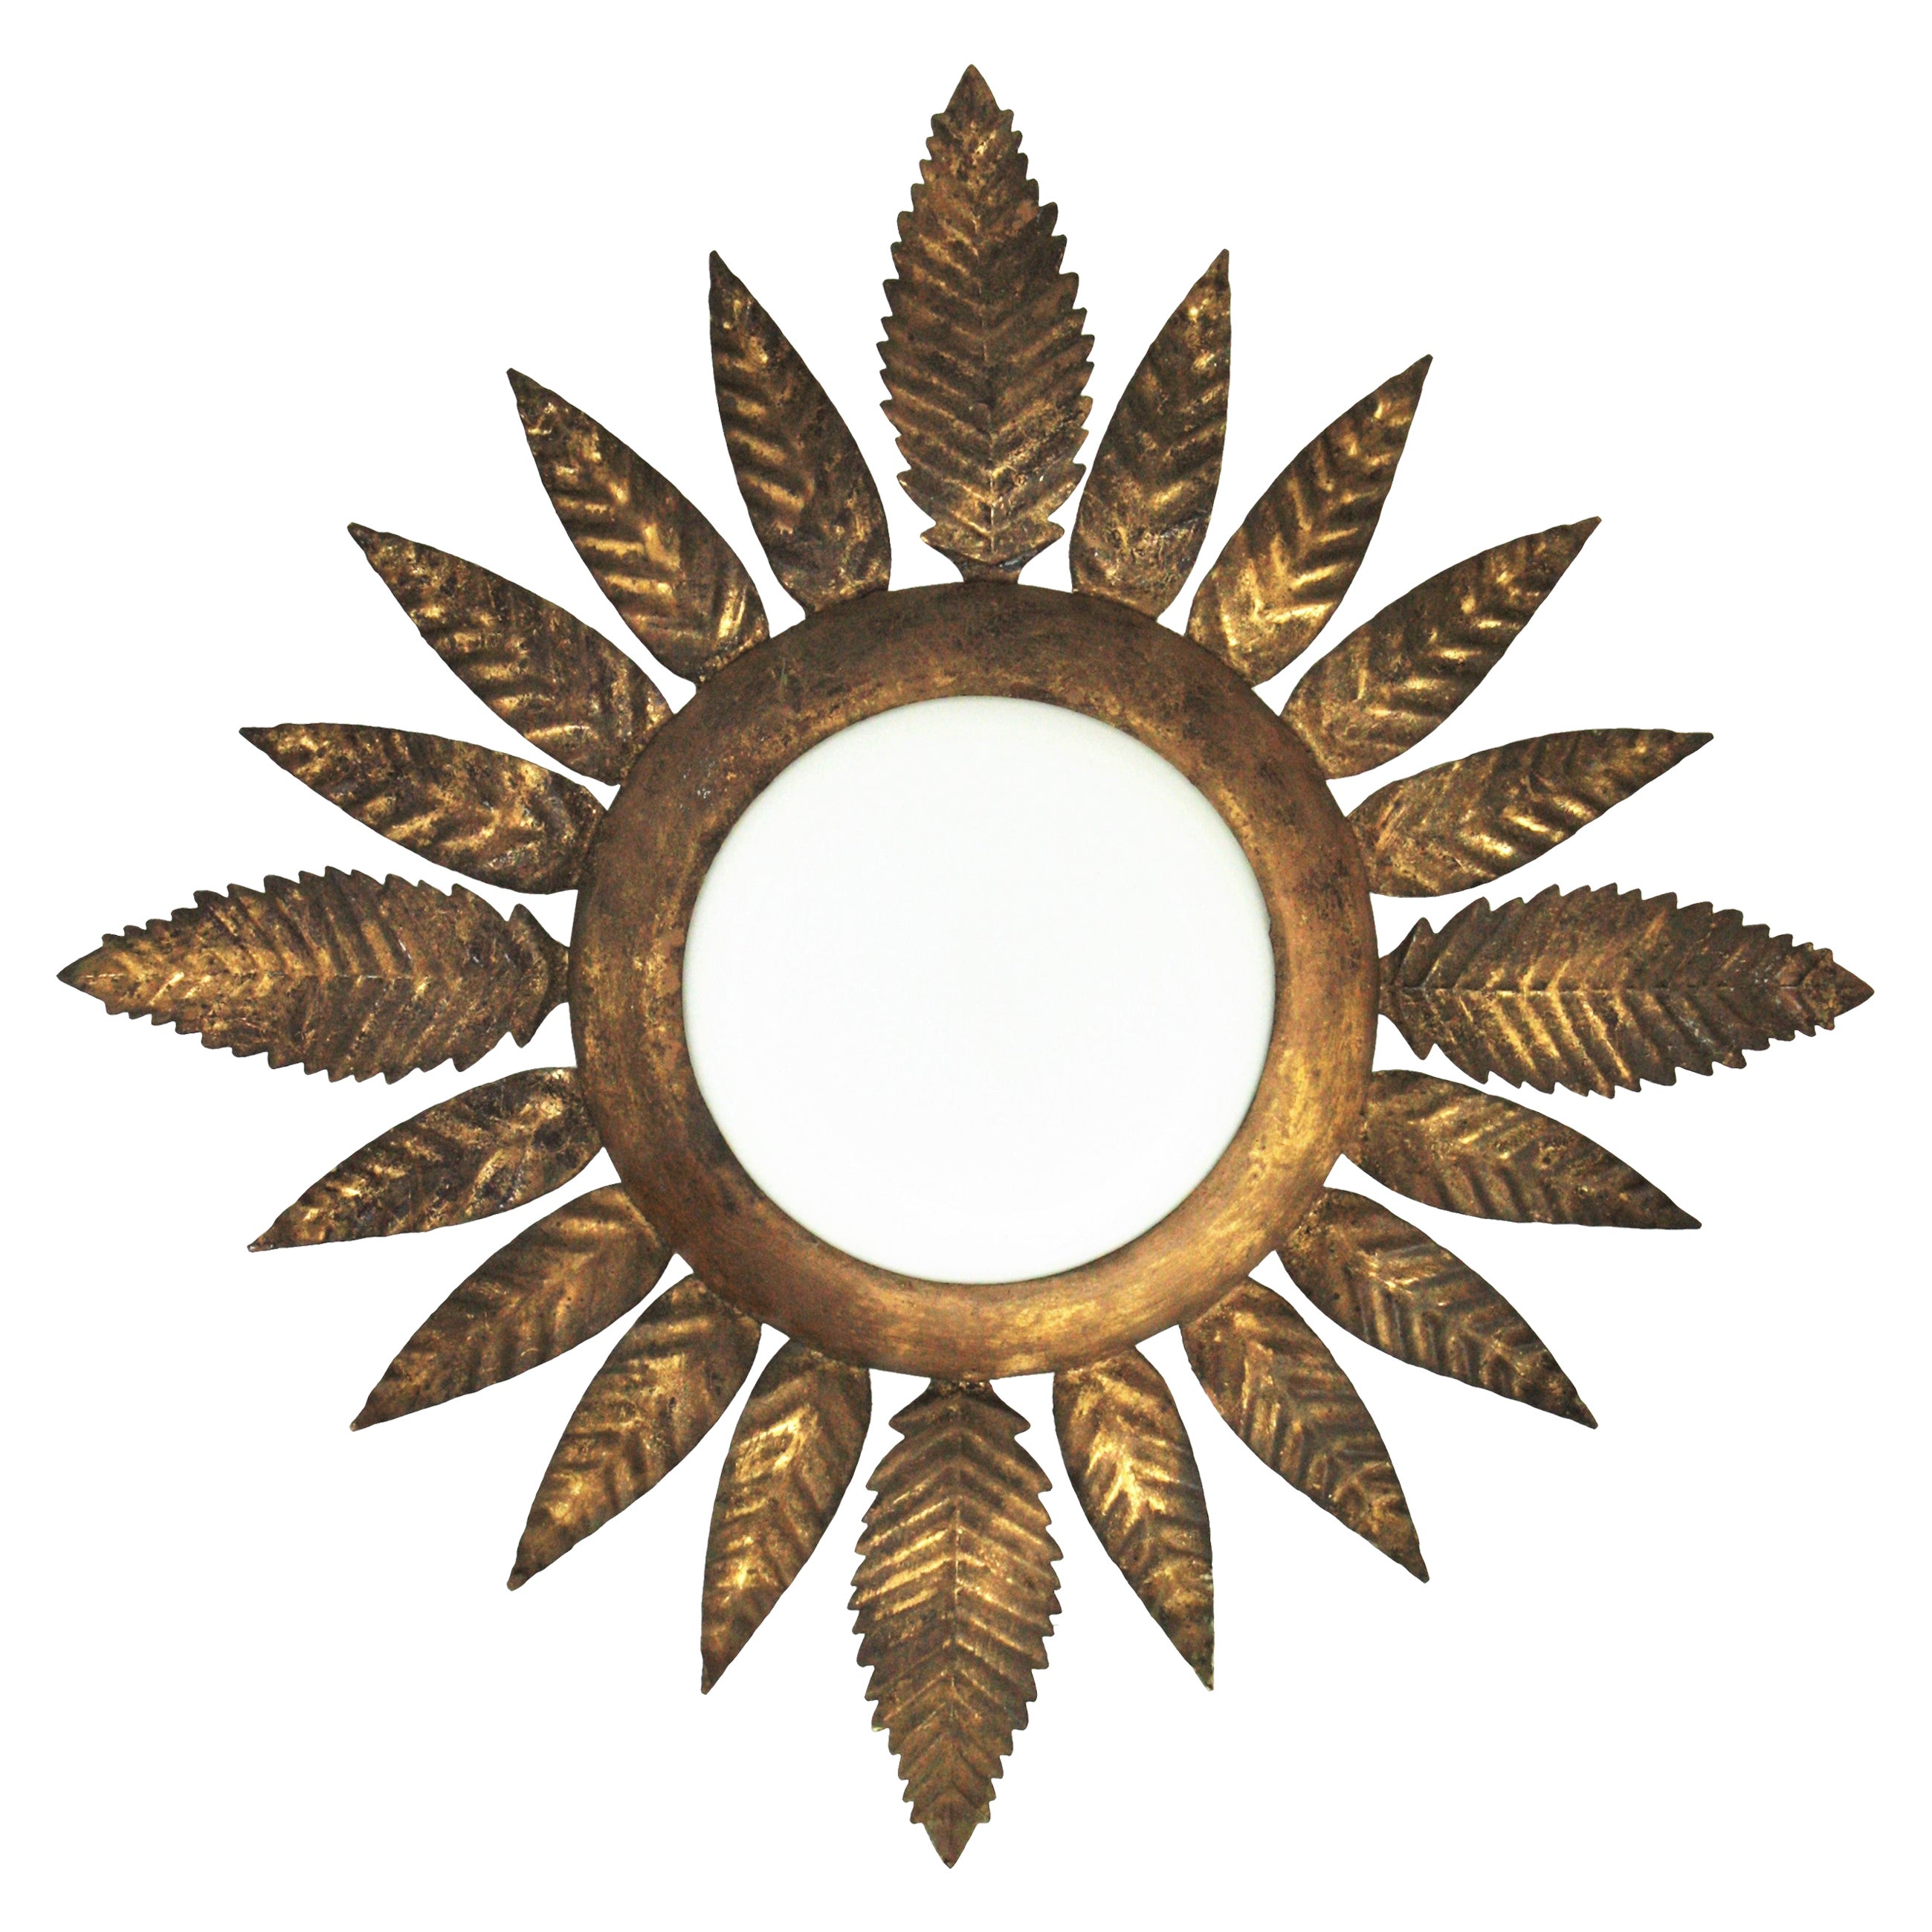 A nice gilt iron flower / sunburst flush mount with leafed frame. France, 1950s
This light fixture features an opaline glass circular shade surrounded by a frame of hand-hammered iron leaves with gold leaf finishing.
It can work as ceiling light